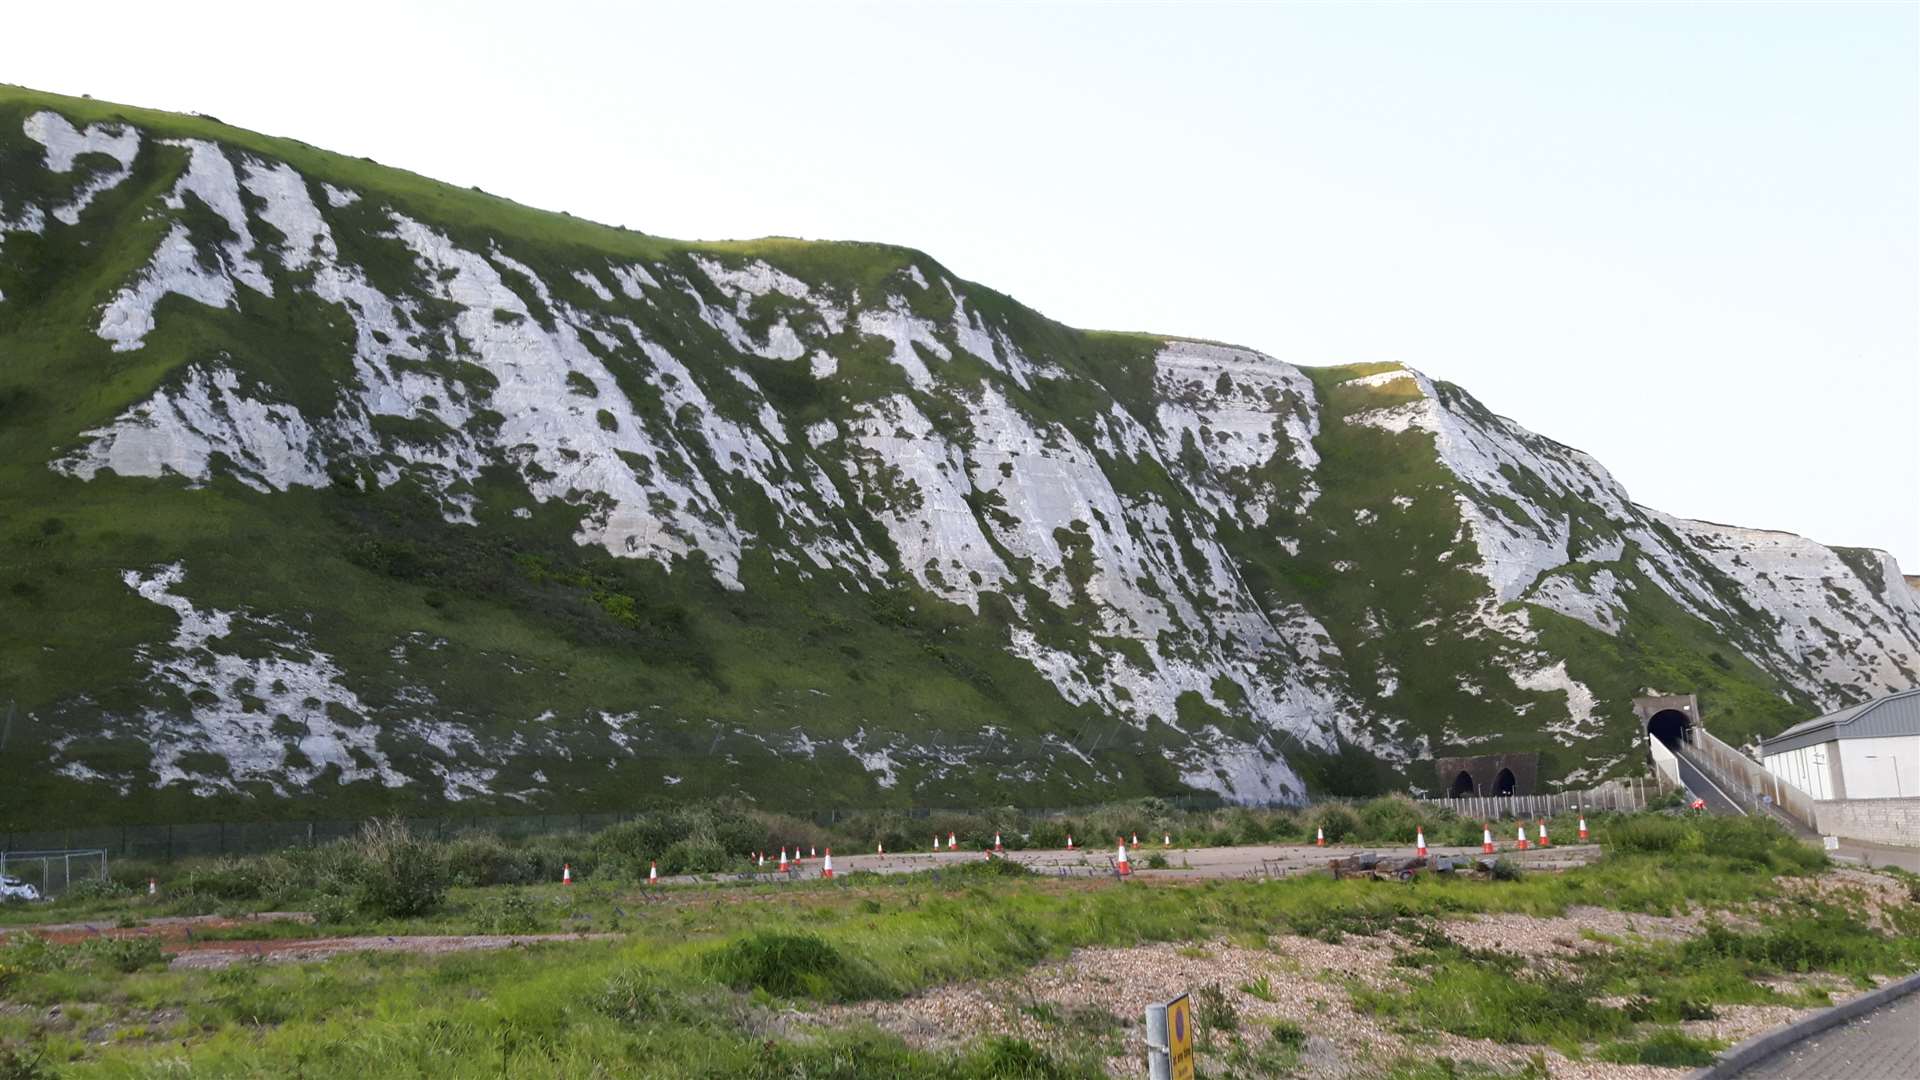 Britain First had been on the beach next to Samphire Hoe